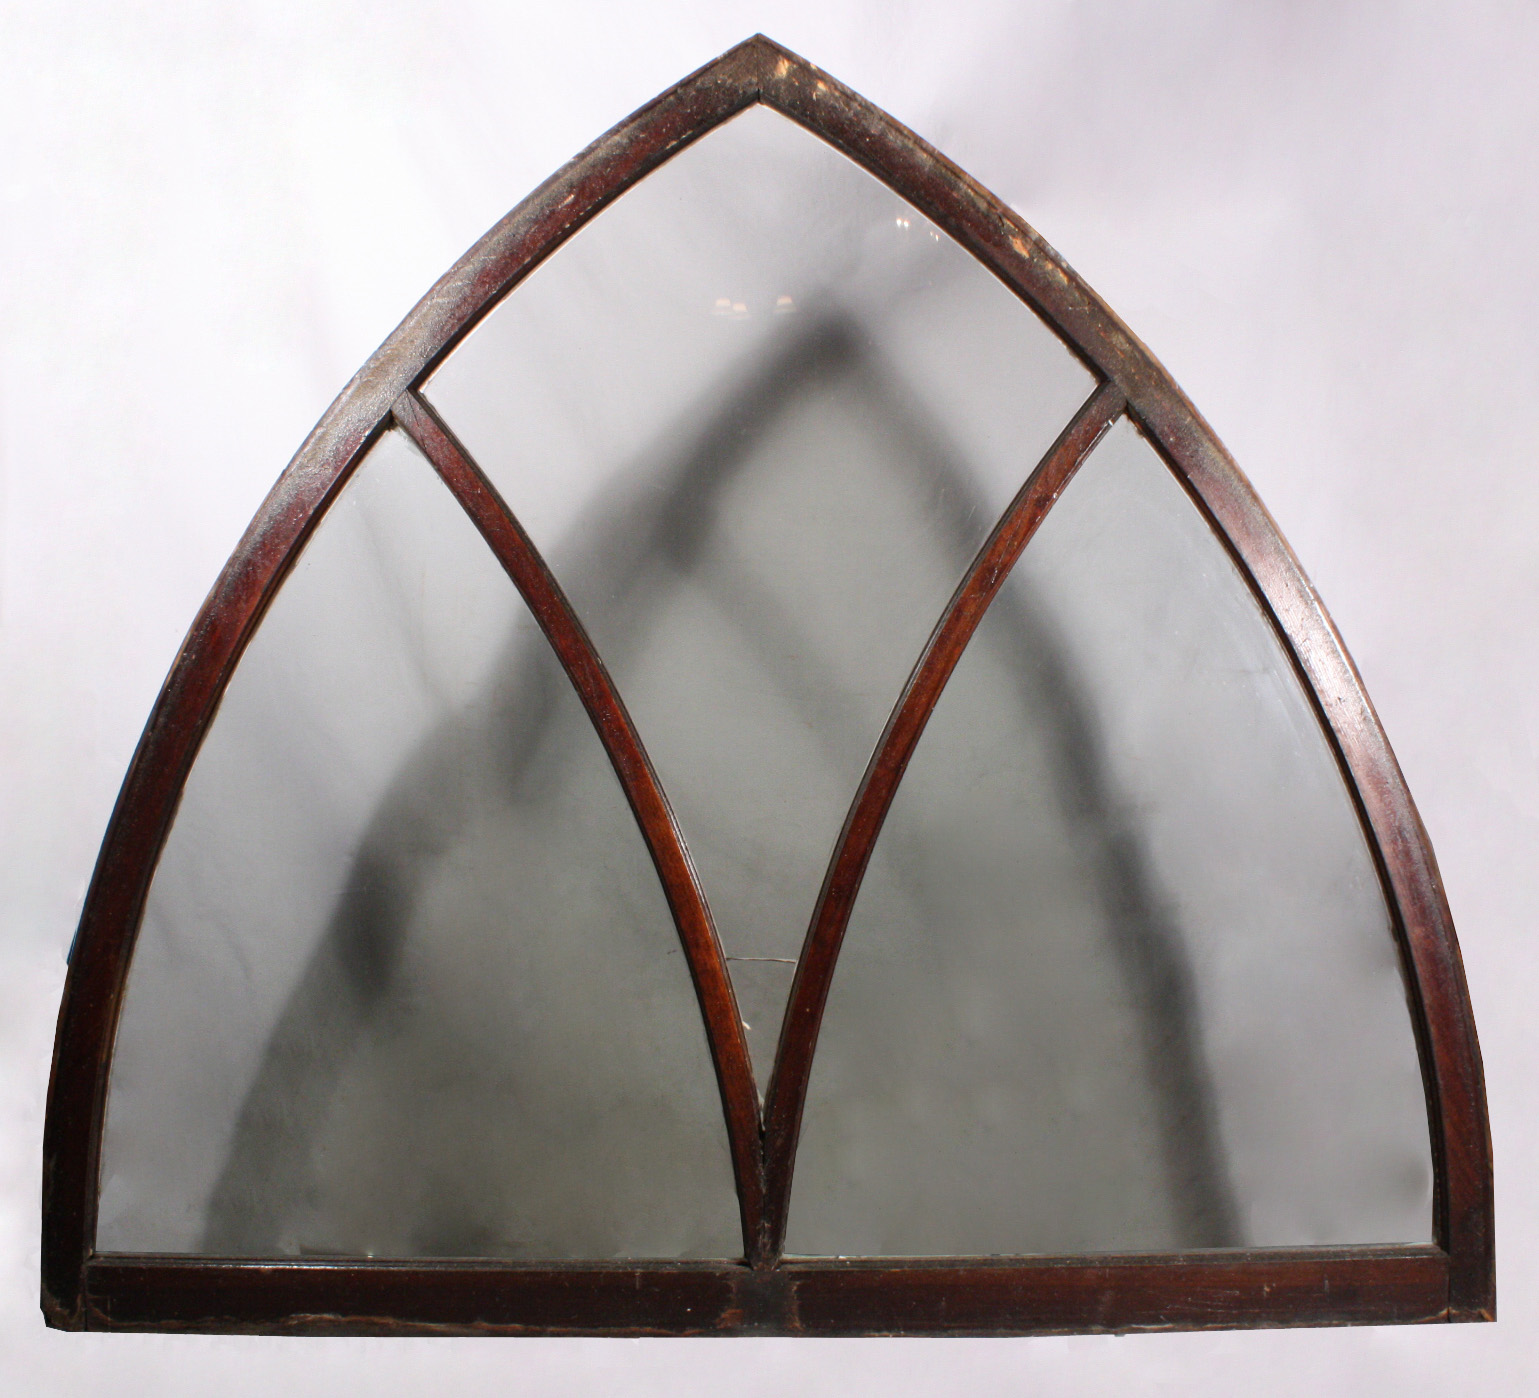 SOLD Marvelous Antique Gothic Revival Arched Window, Early 1900’s-0